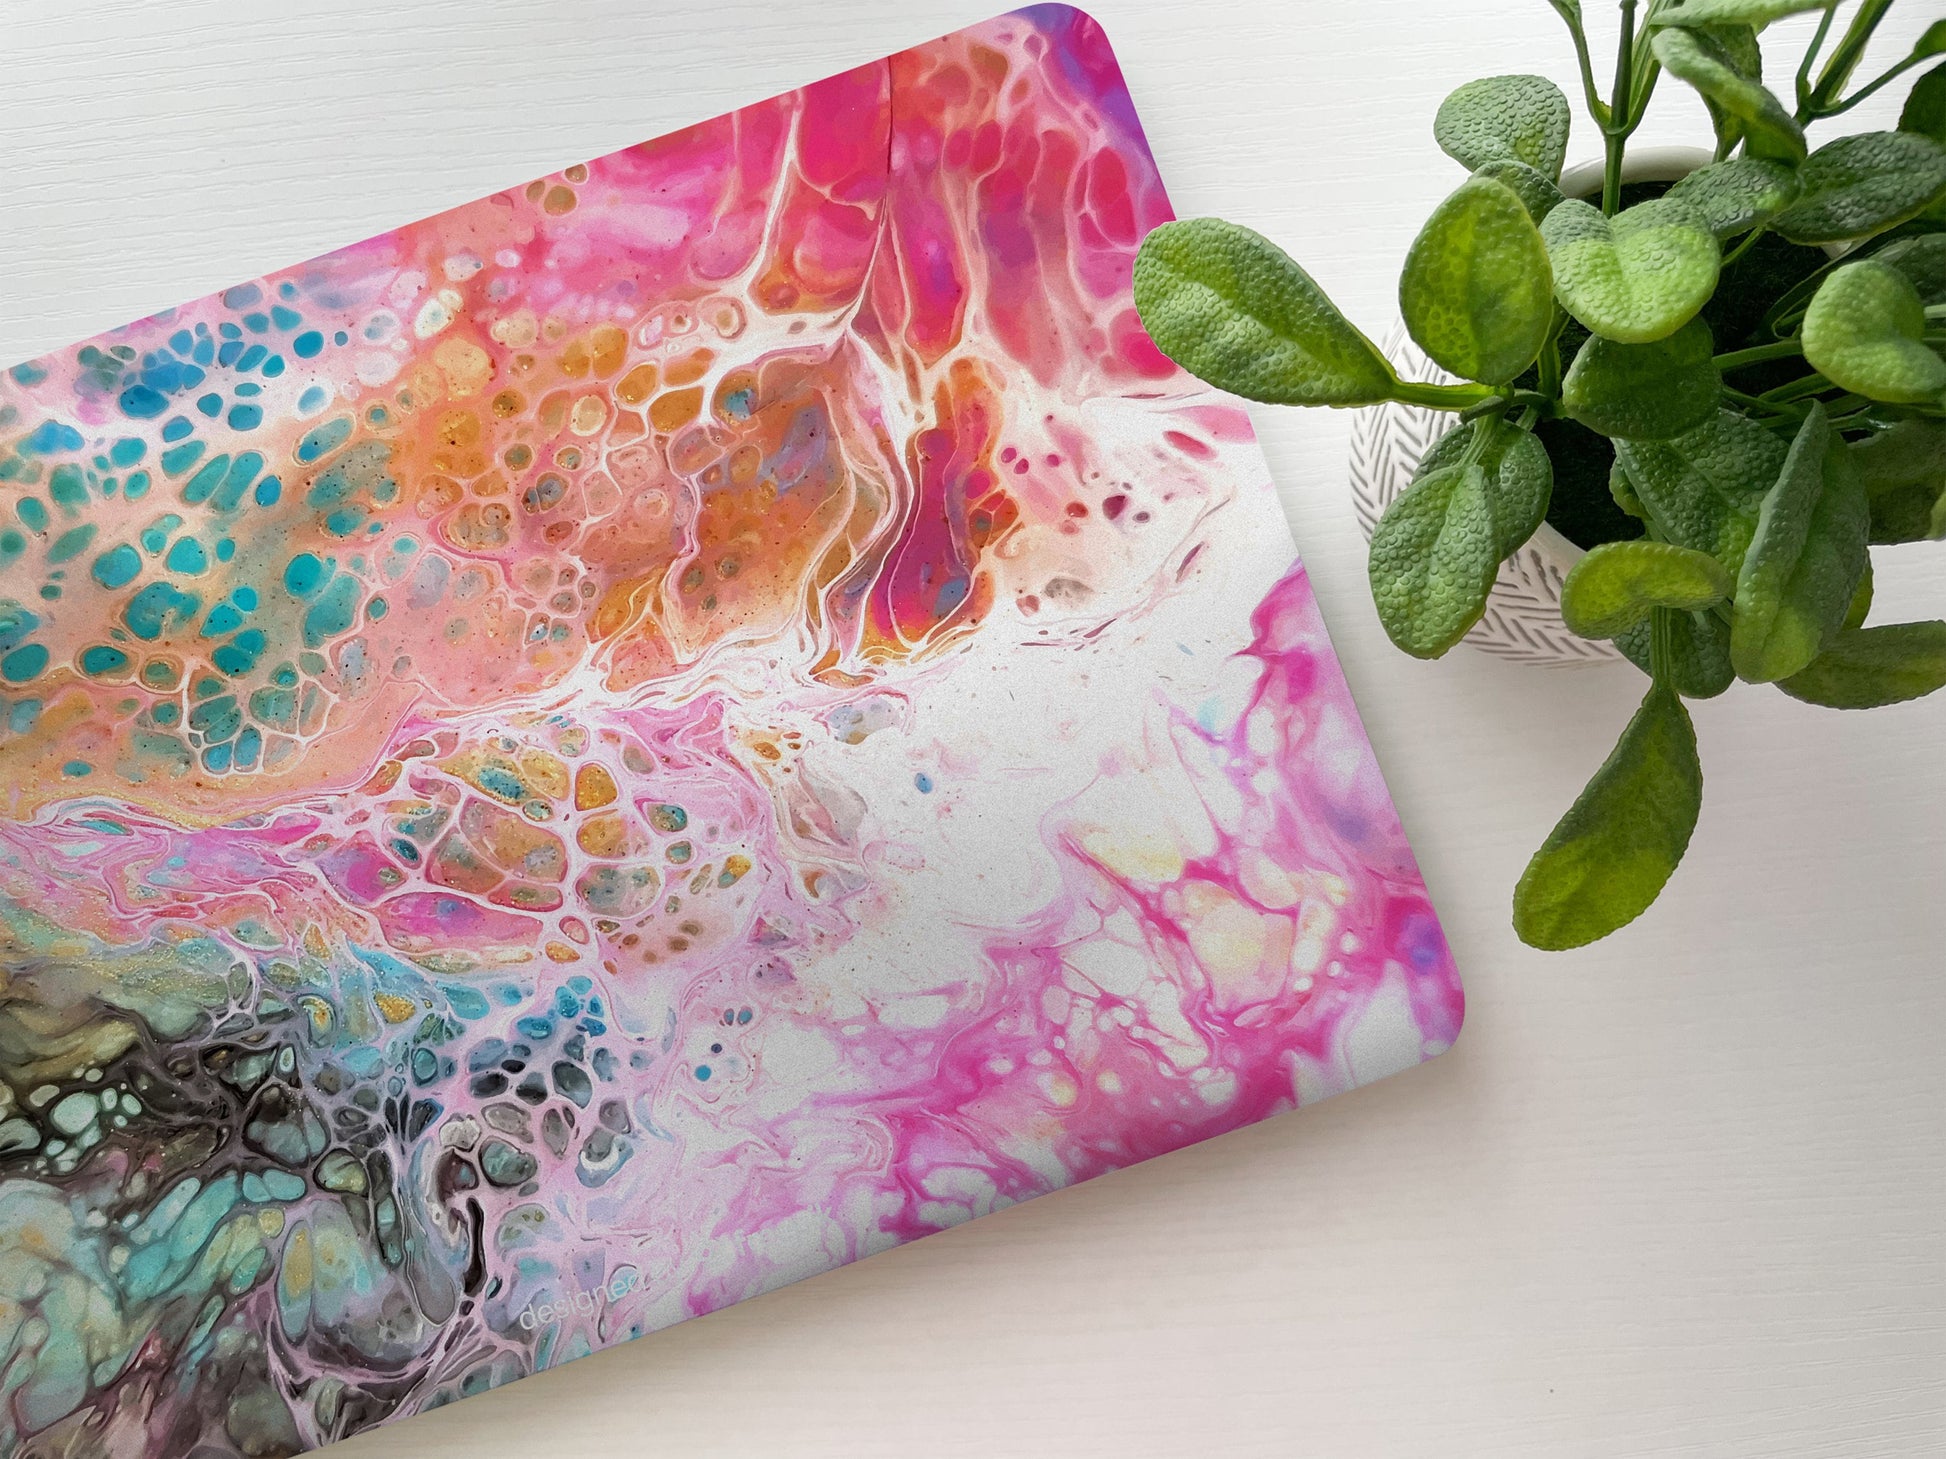 Colorful Marble Laptop Skin, Laptop Cover, Laptop Skins, Removable Laptop Skins, Laptop Decal, Customized Laptop Skin, Laptop Stickers 124 - James & Inks